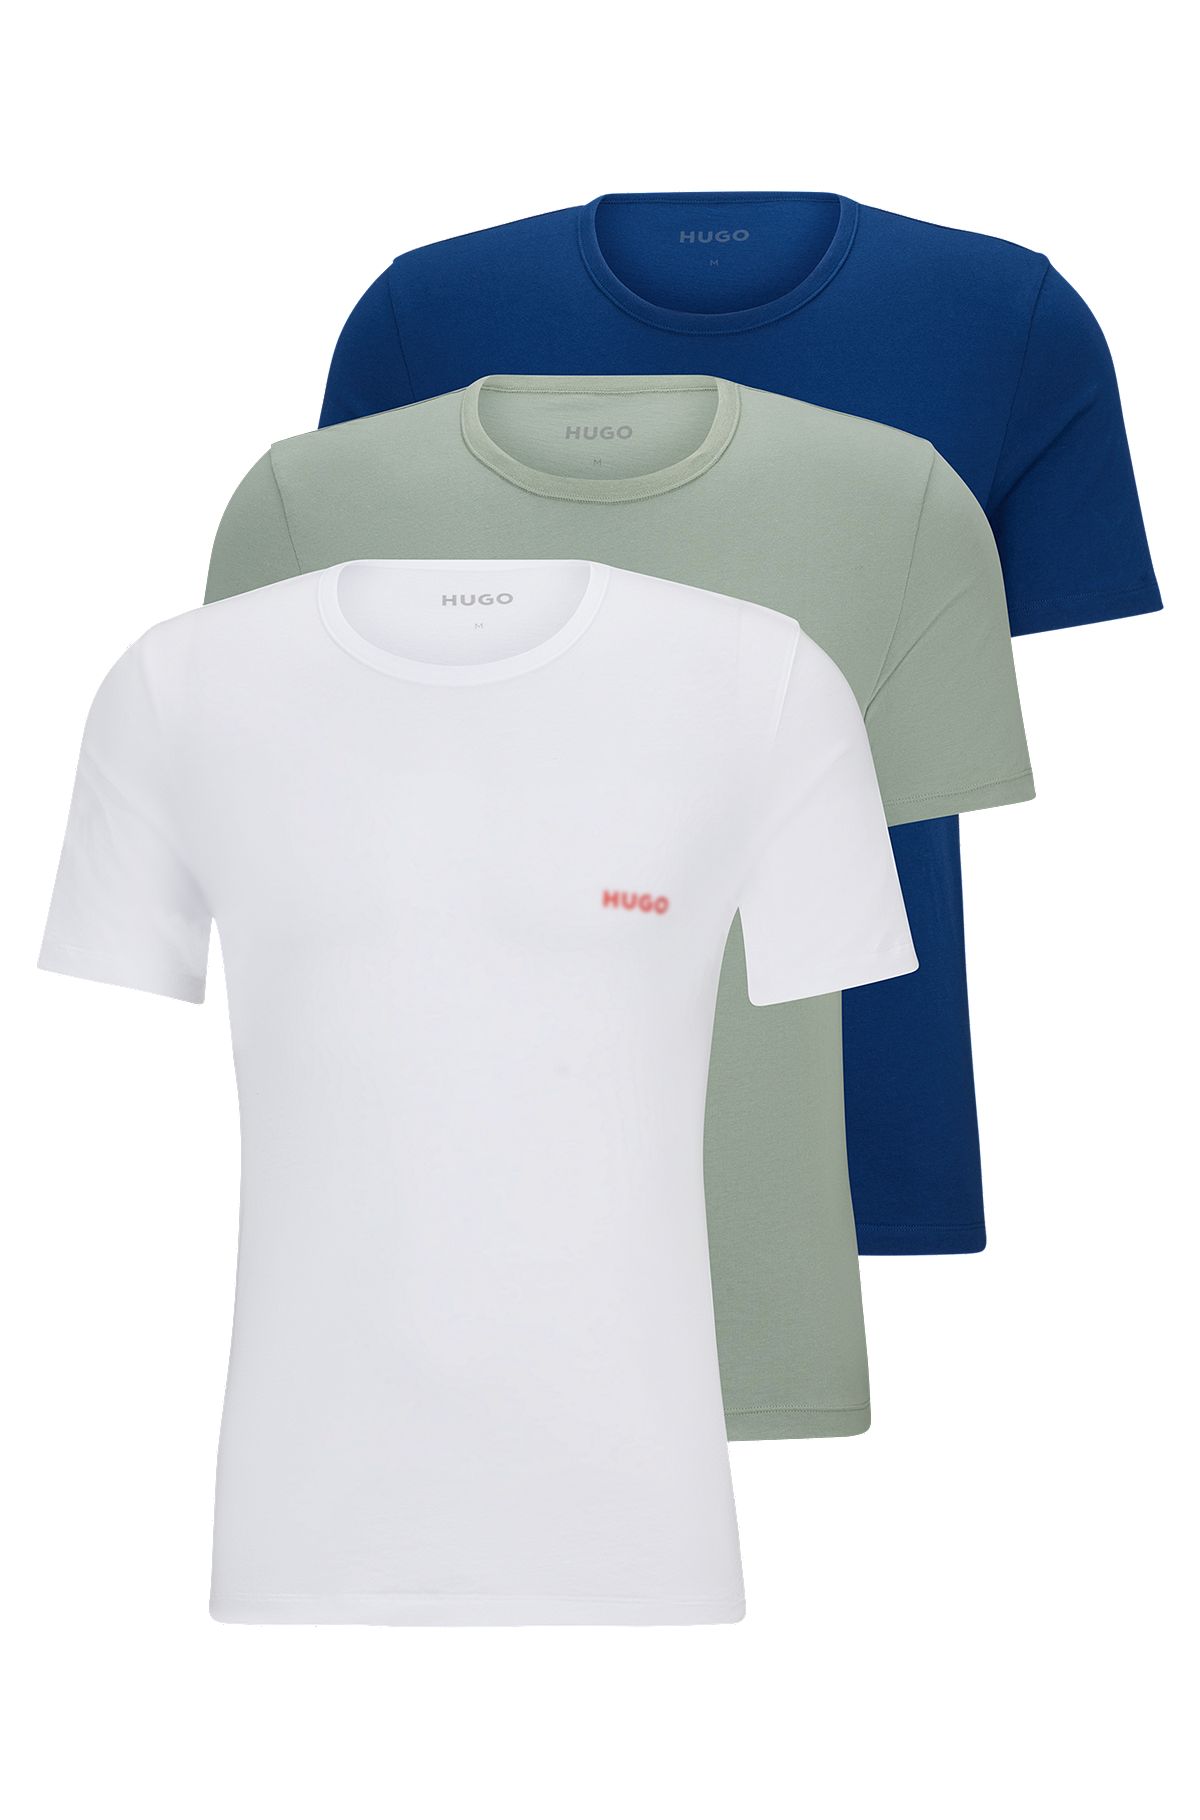 underwear cotton logo HUGO print - of Triple-pack with T-shirts